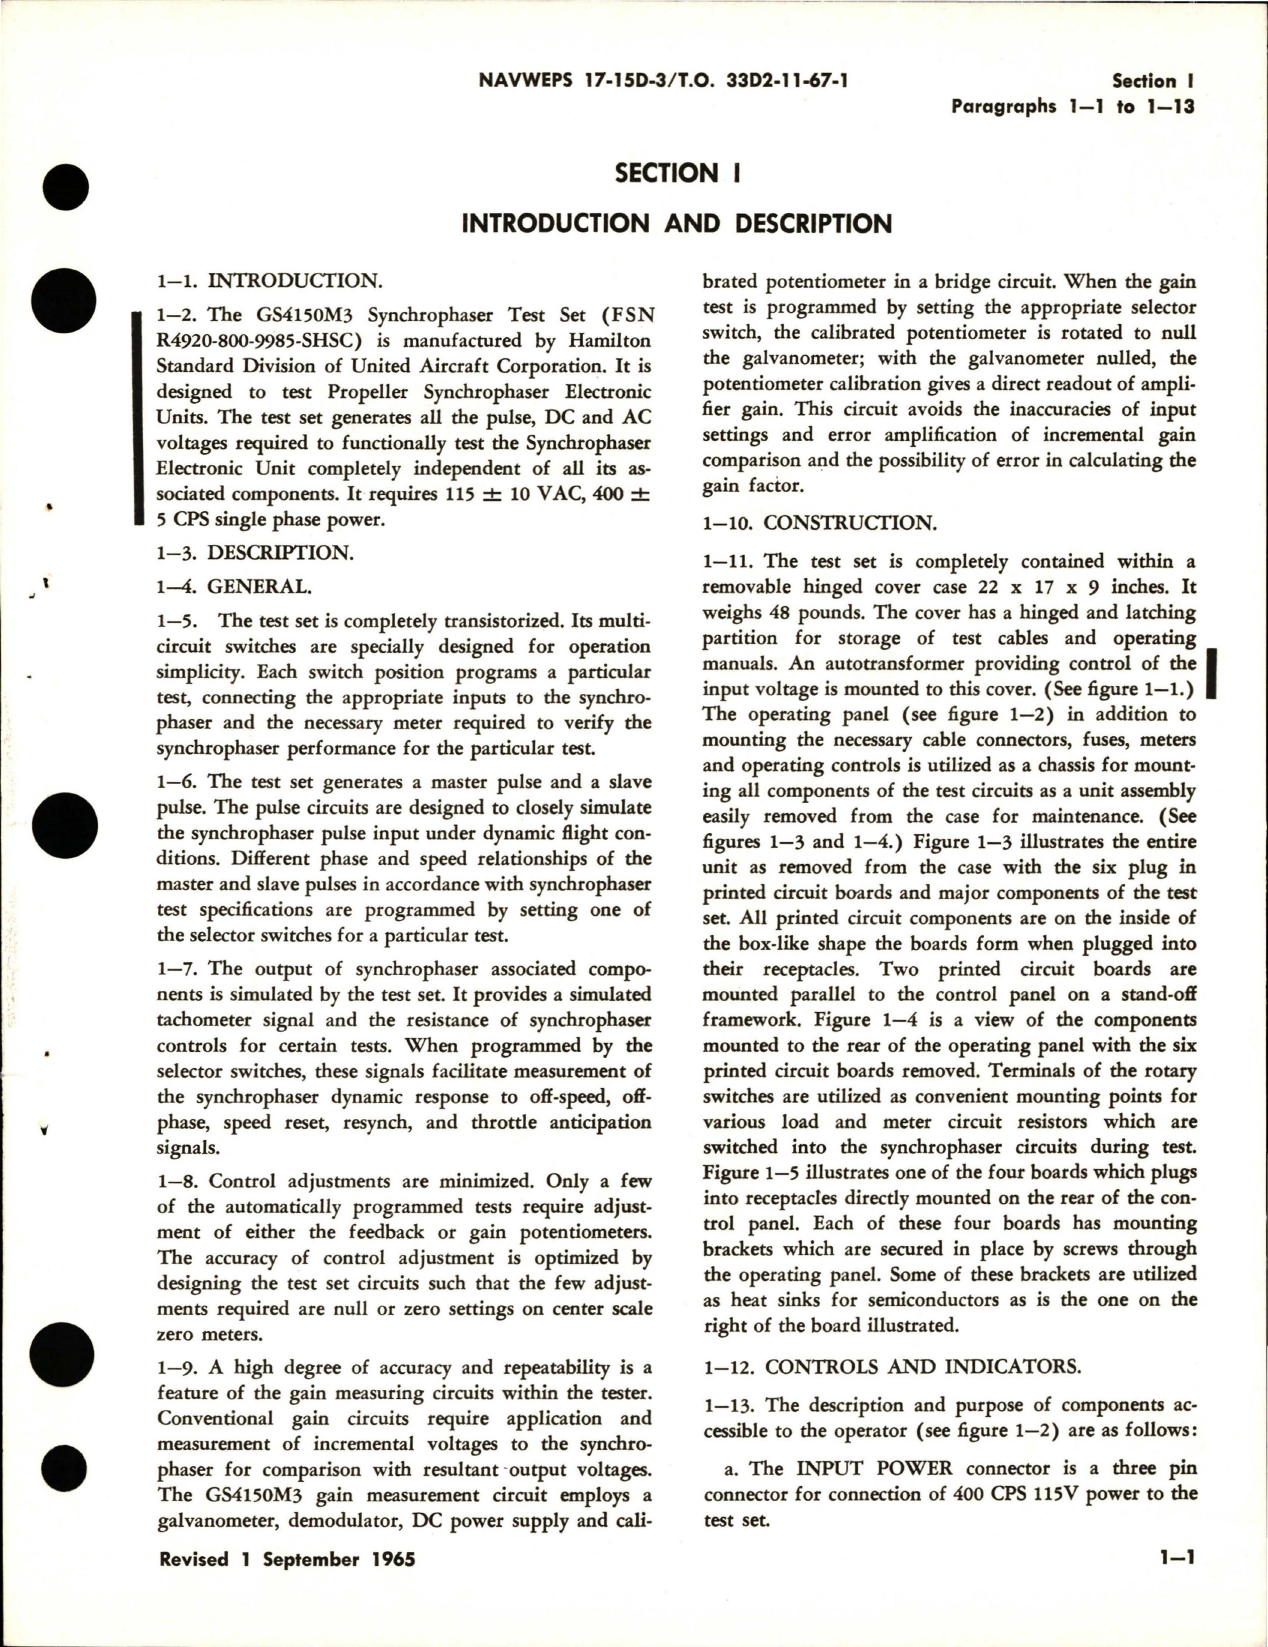 Sample page 5 from AirCorps Library document: Operation, Service Instructions with Parts for Synchrophaser Test Set - Part GS4150M3